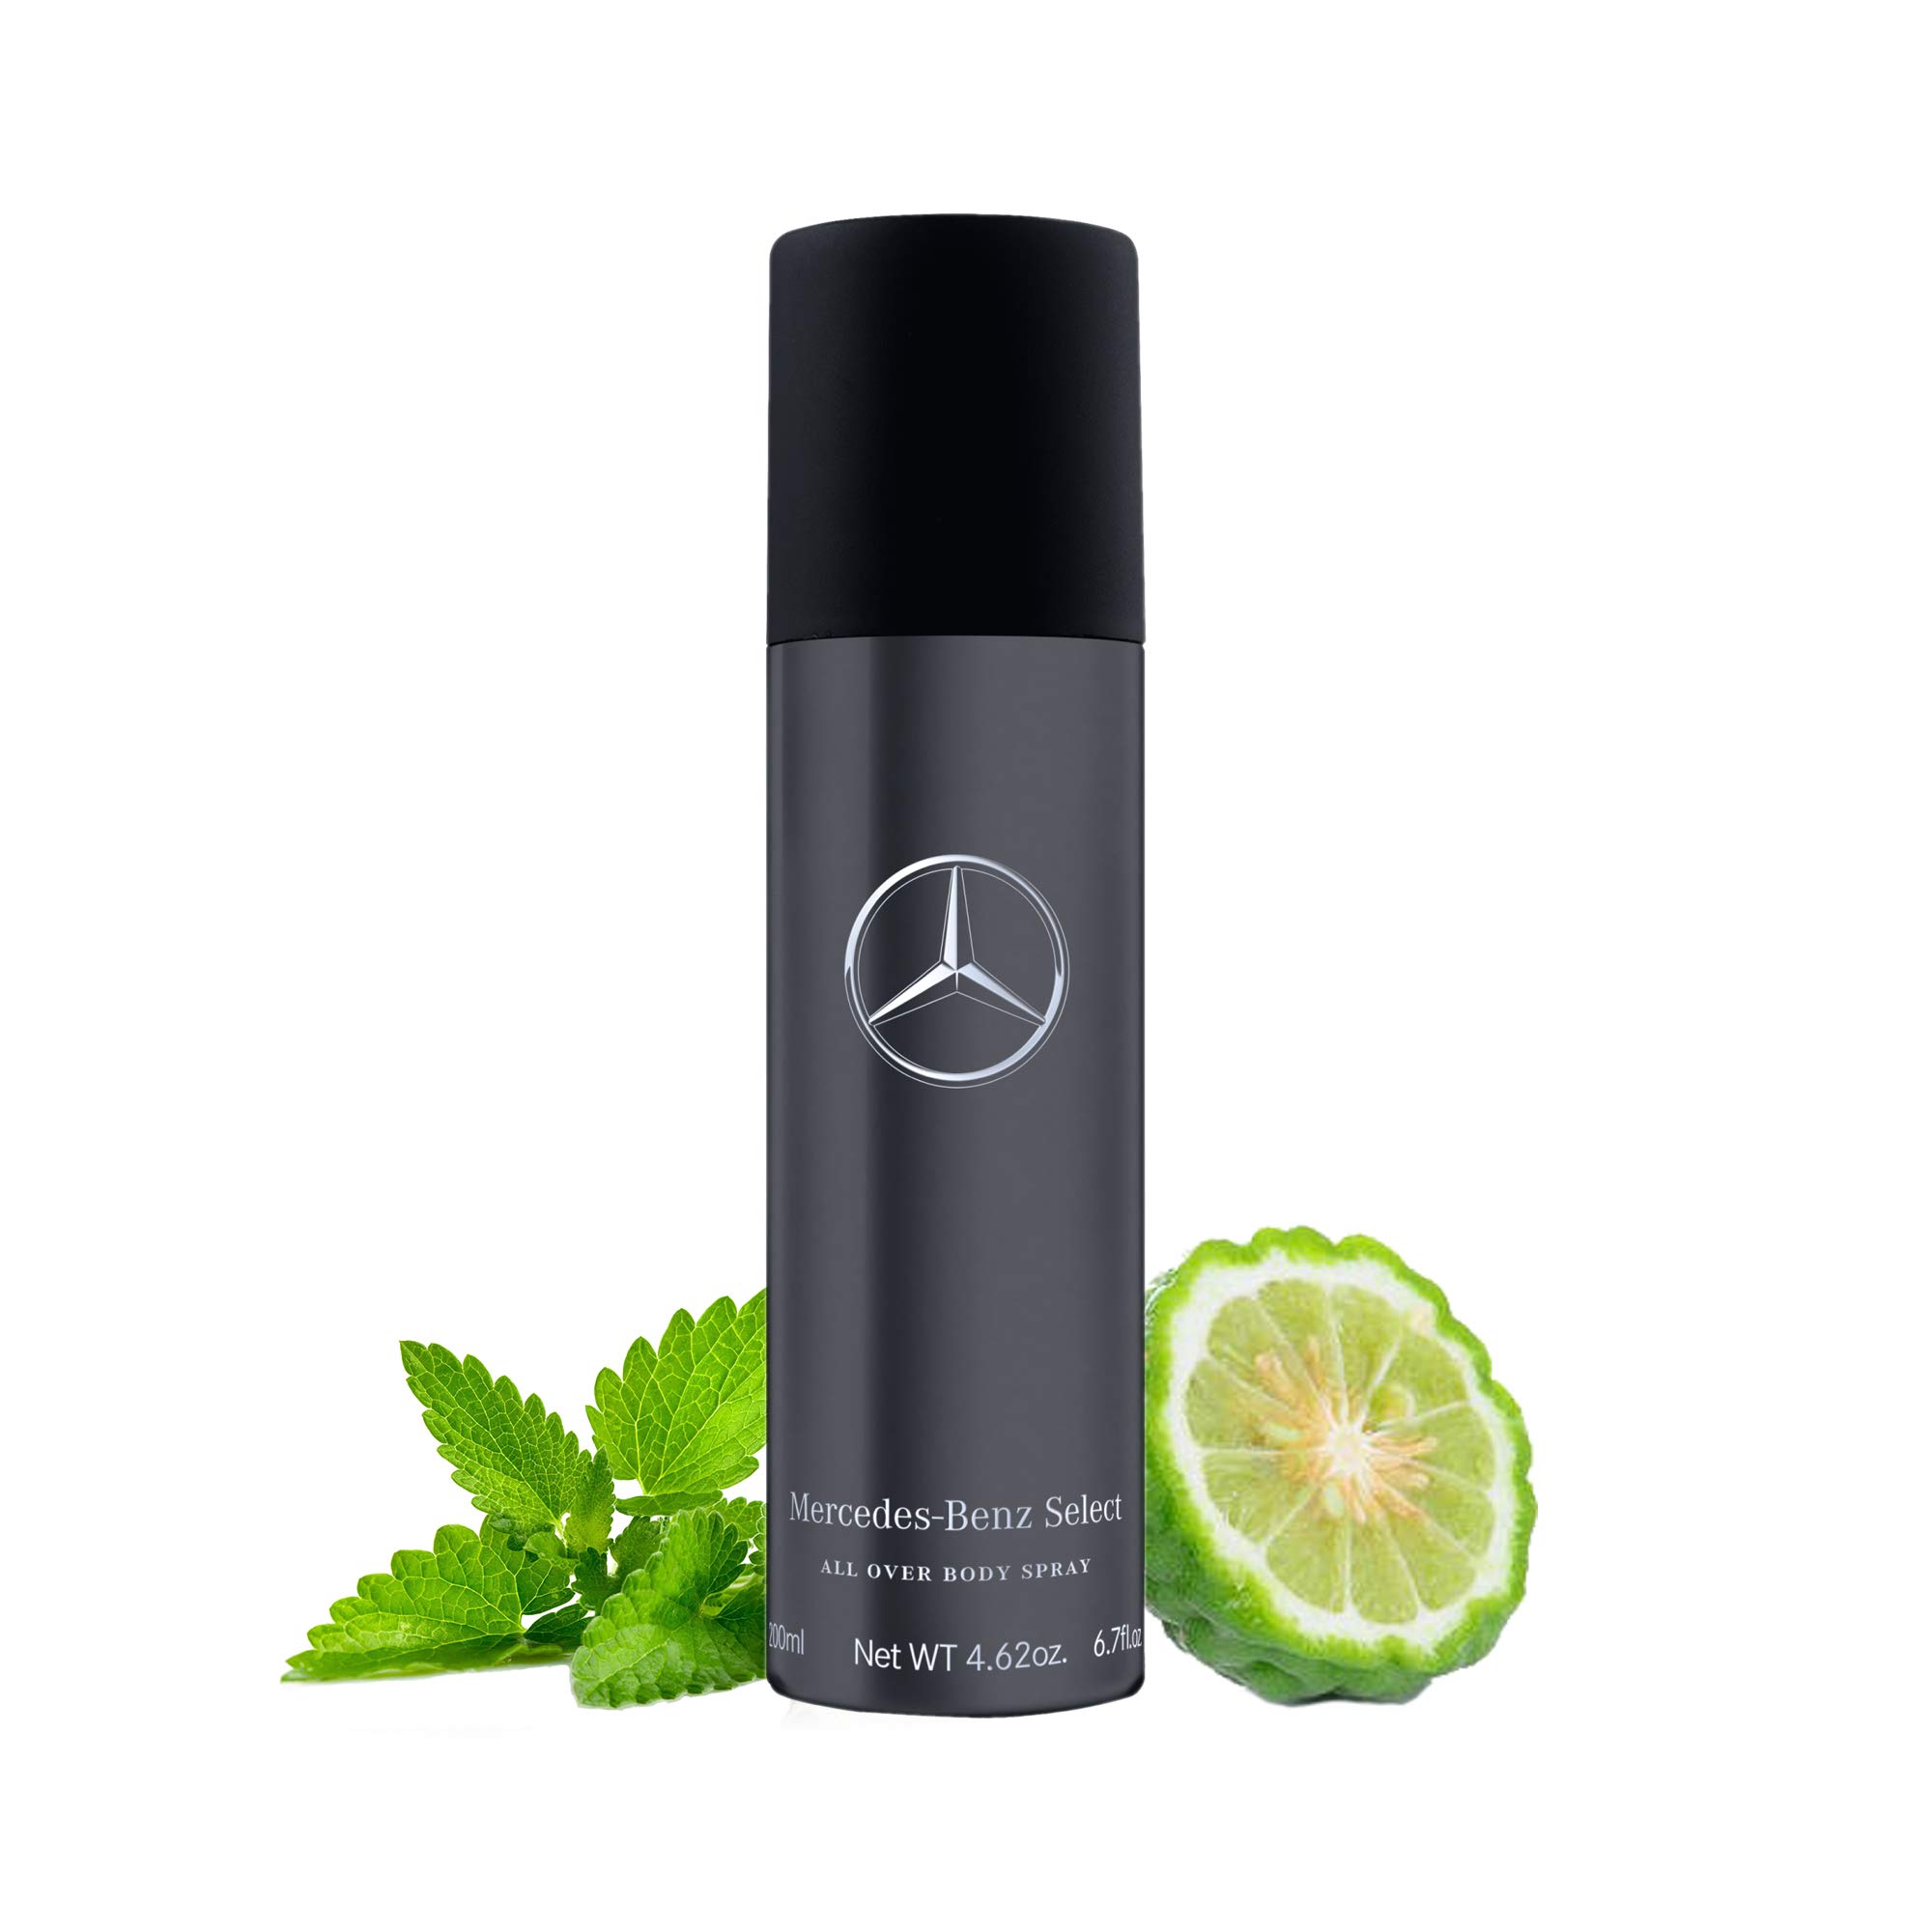 Mercedes-Benz - Select - Deodorant Spray - Fast Drying Formula Lessens Perspiration For All Day Freshness - Long-Lasting - For All Skin Types - Prolong The Intensity Of Your Signature Scent - 4.6 Oz